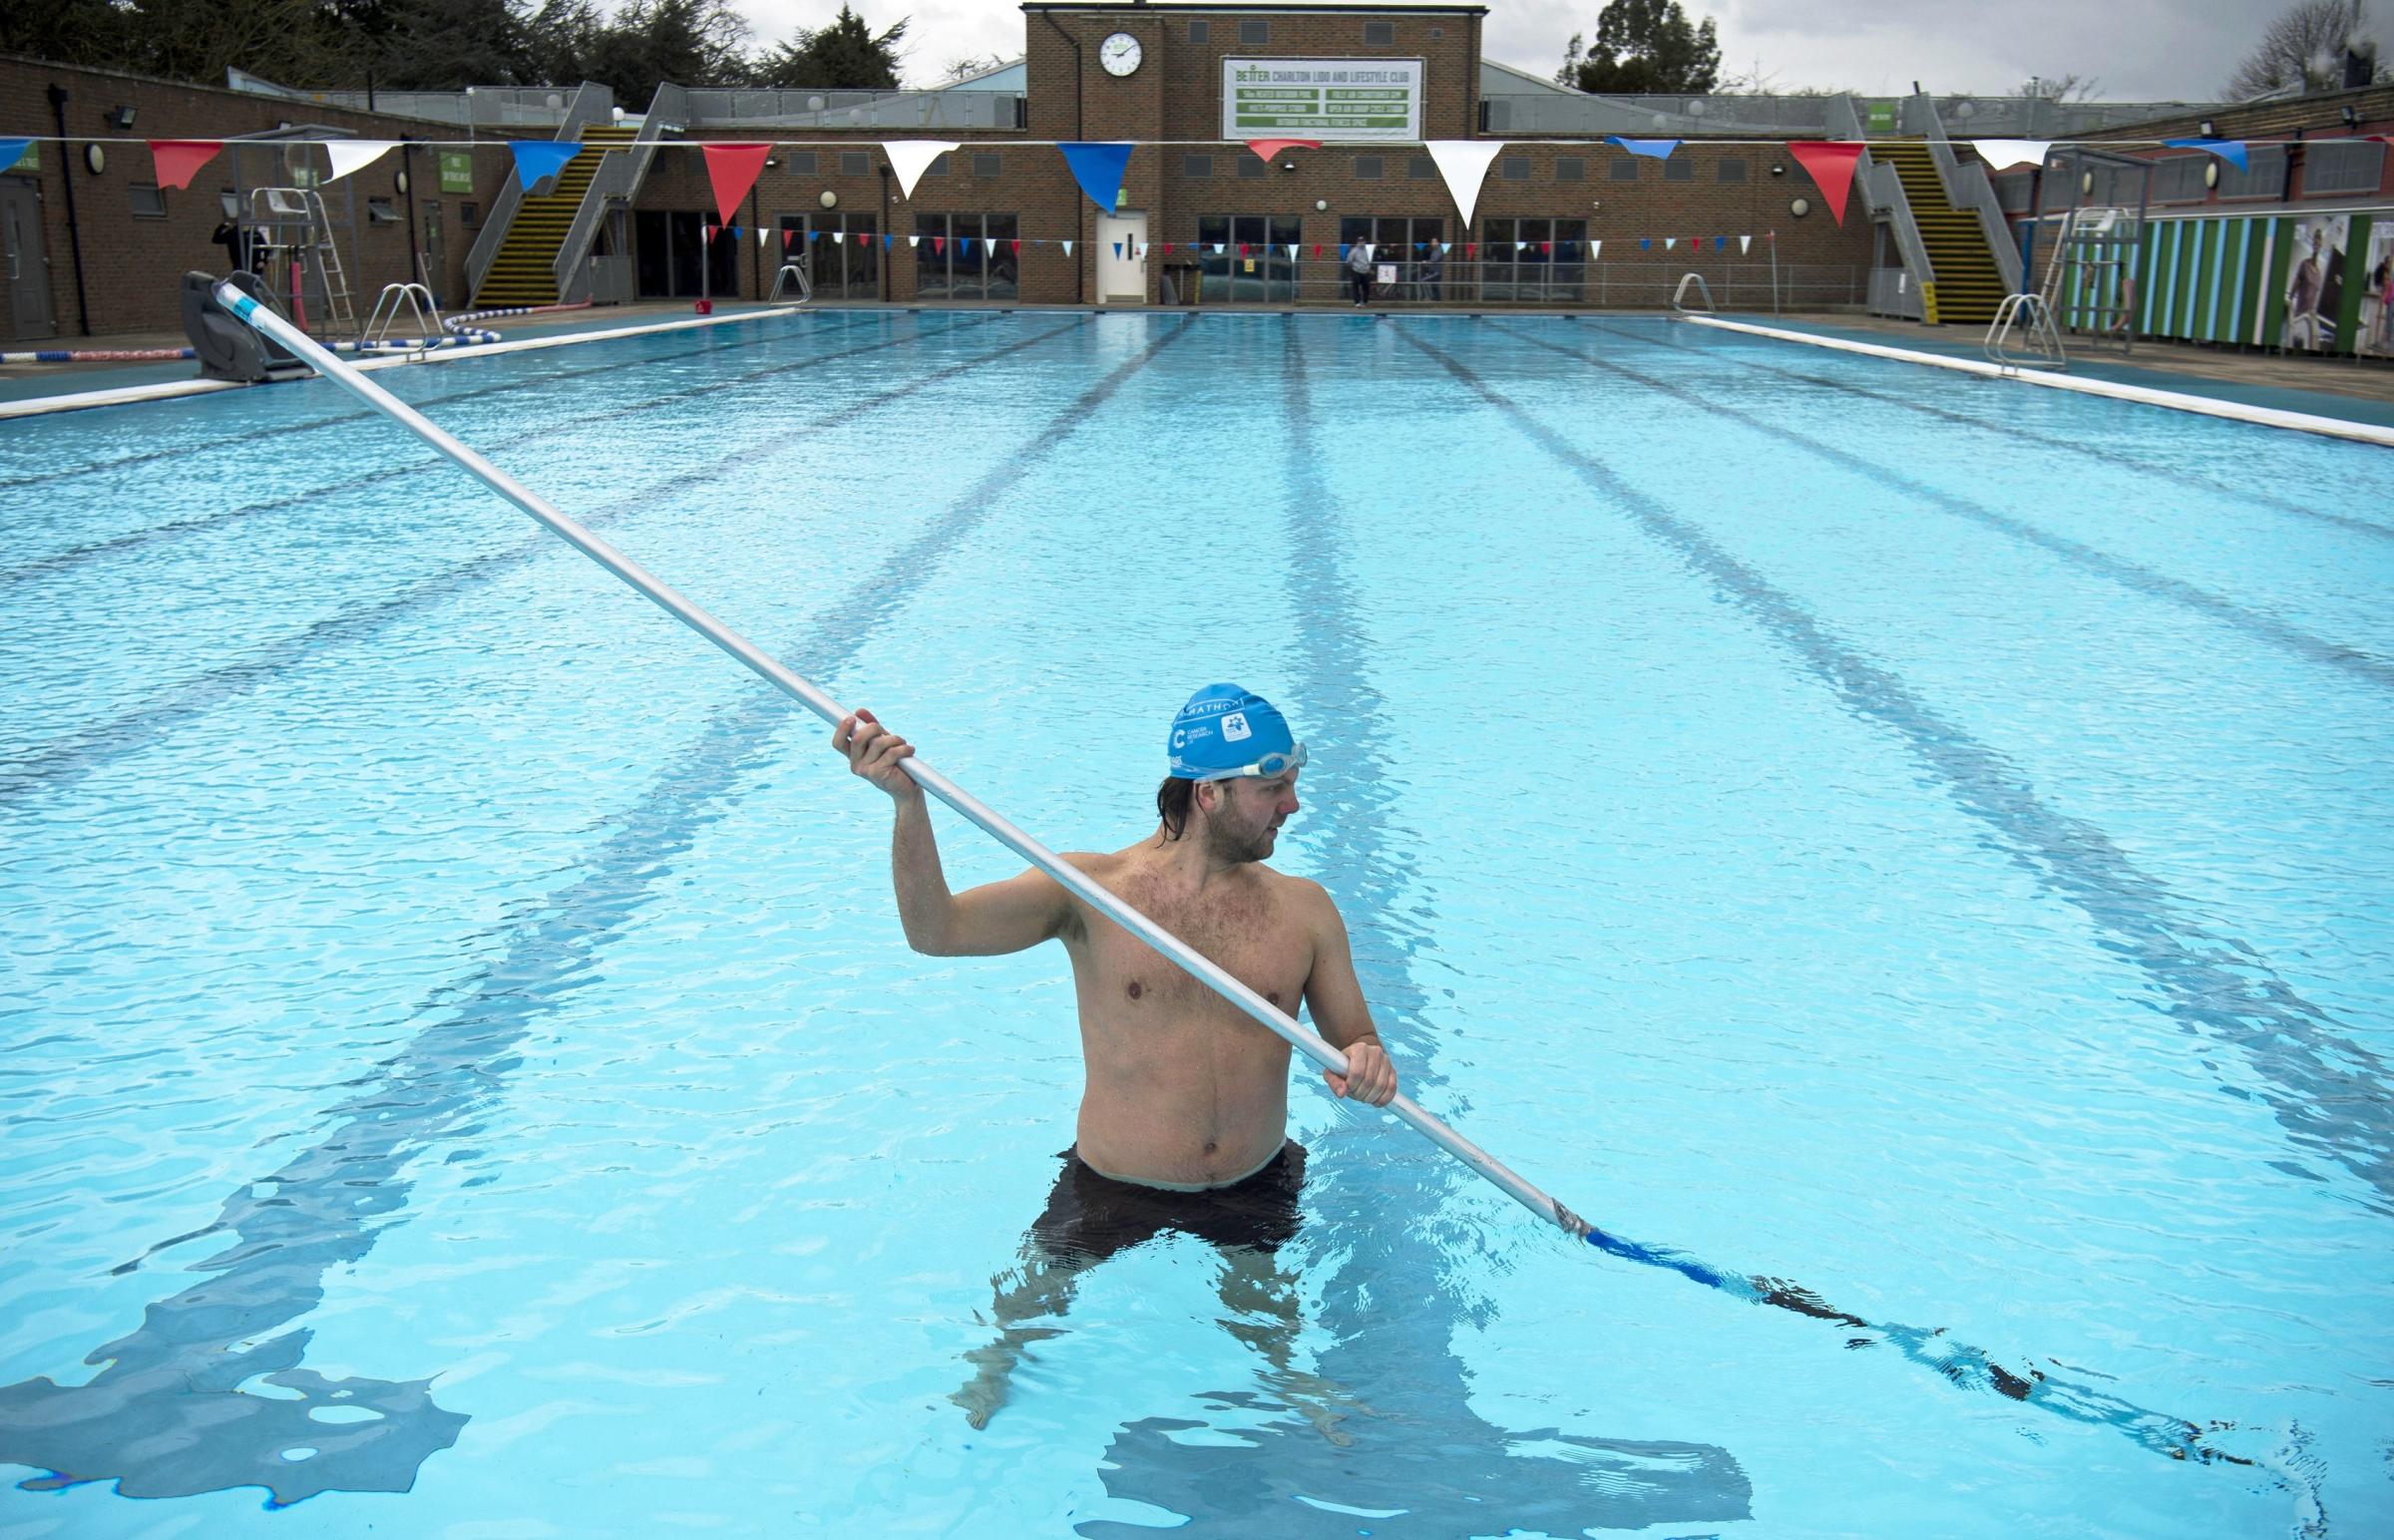 A member of staff cleans the bottom of the pool during pre-opening preparation and cleaning of Charlton Lido, south London, following its closure due to lockdown Picture: MARTIN RICKETT/PA